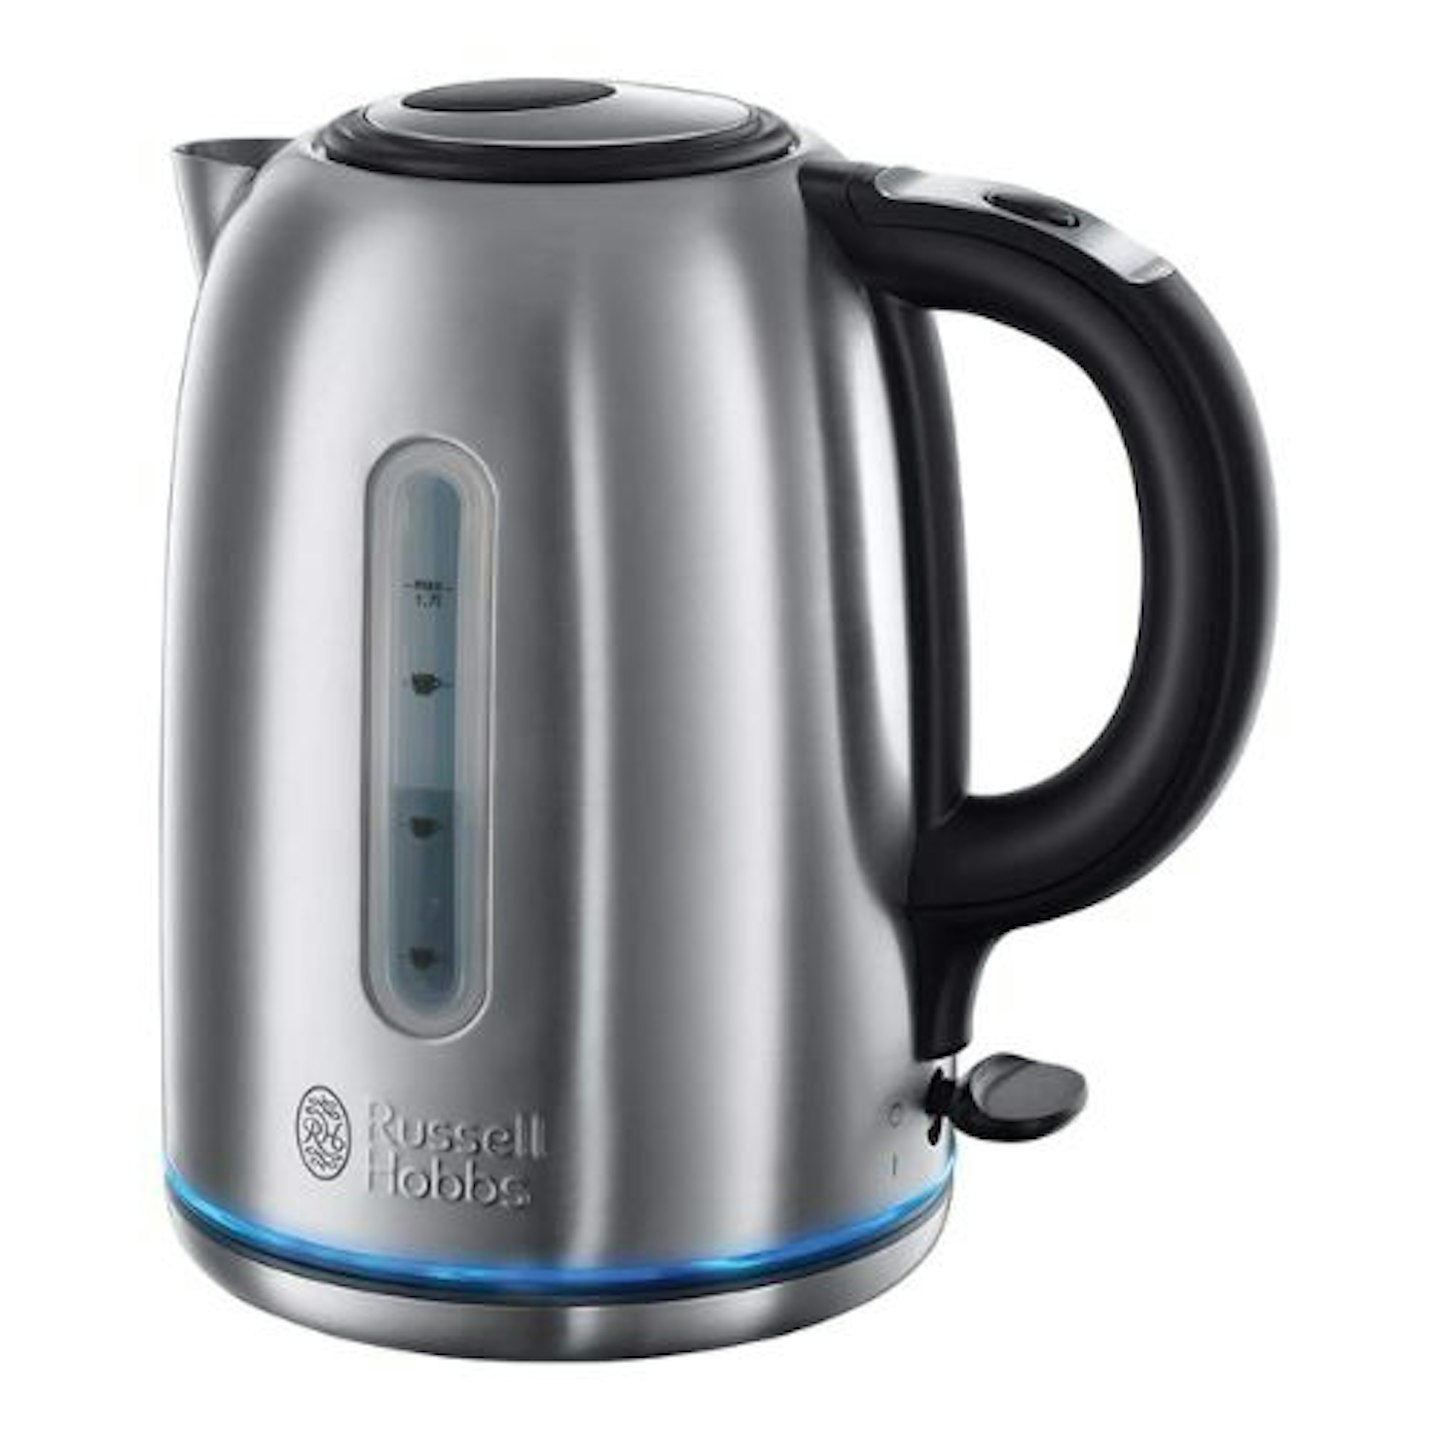 Russell Hobbs 20460 Quiet Boil Kettle, Brushed Stainless Steel, 3000W, 1.7 Litres